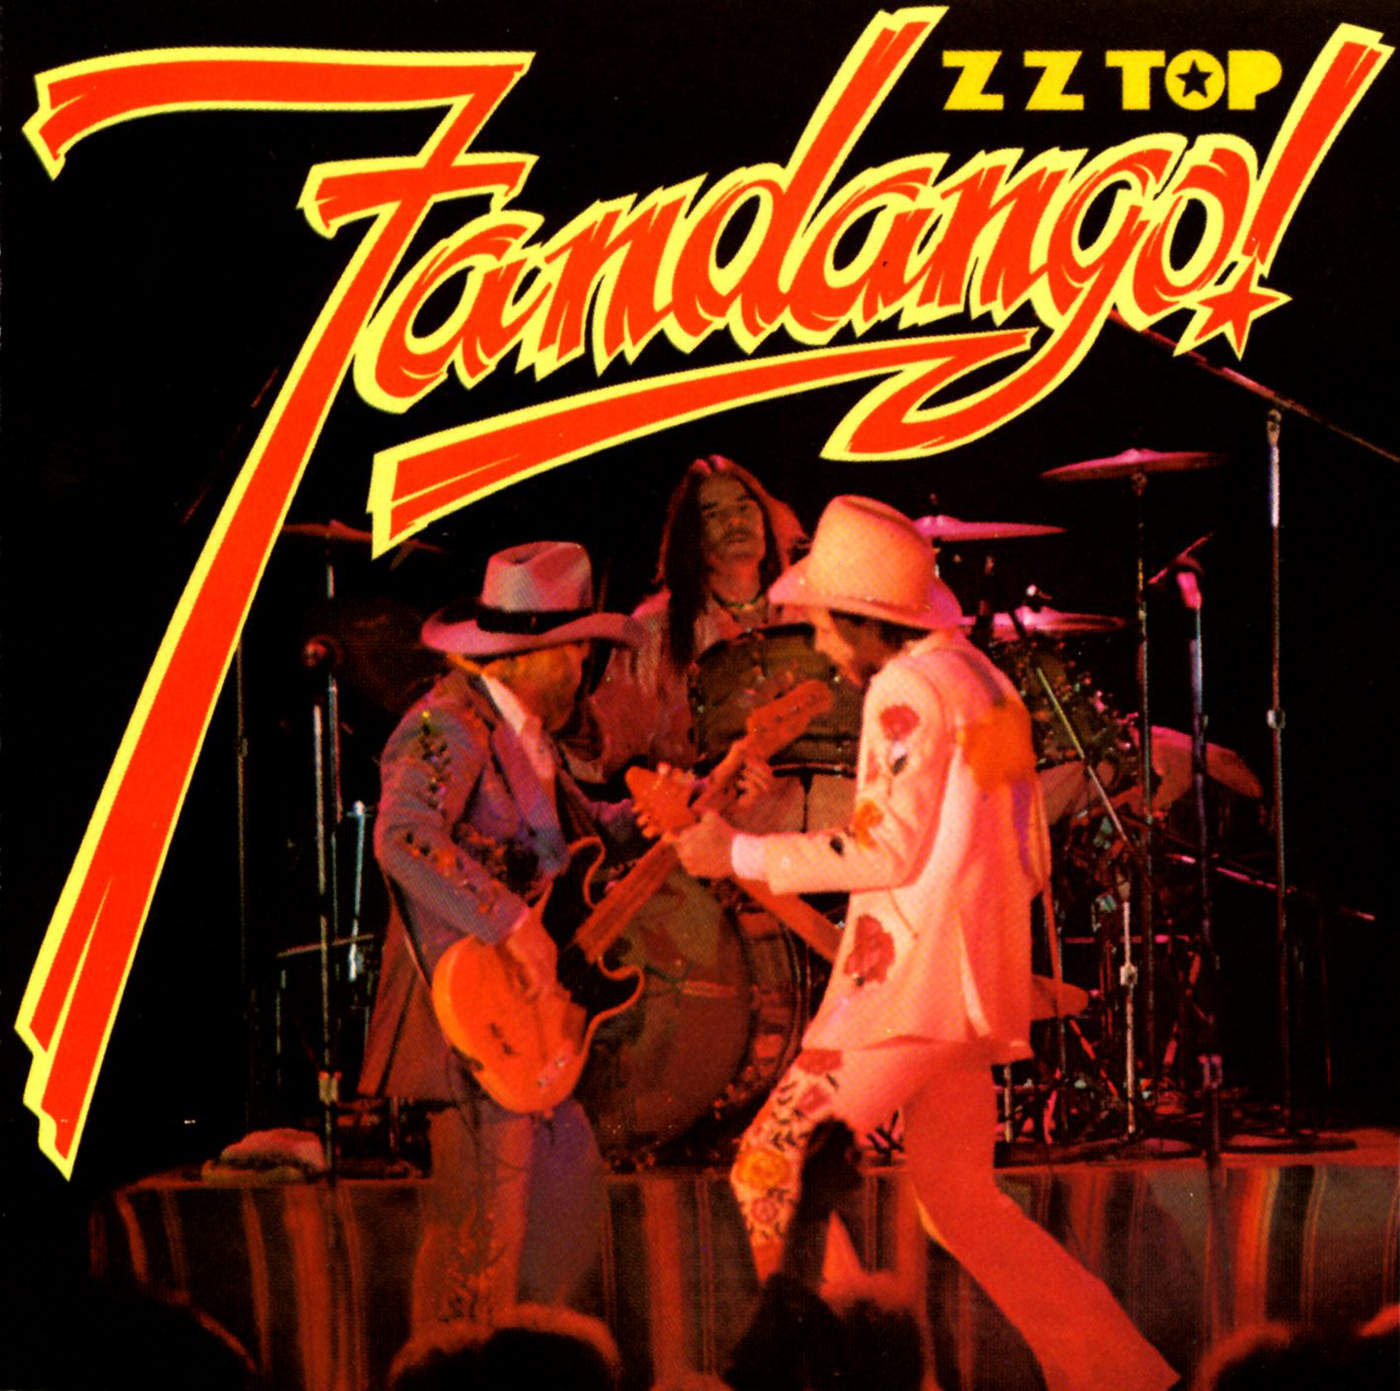 Art for Nasty Dogs and Funky Kings by ZZ Top